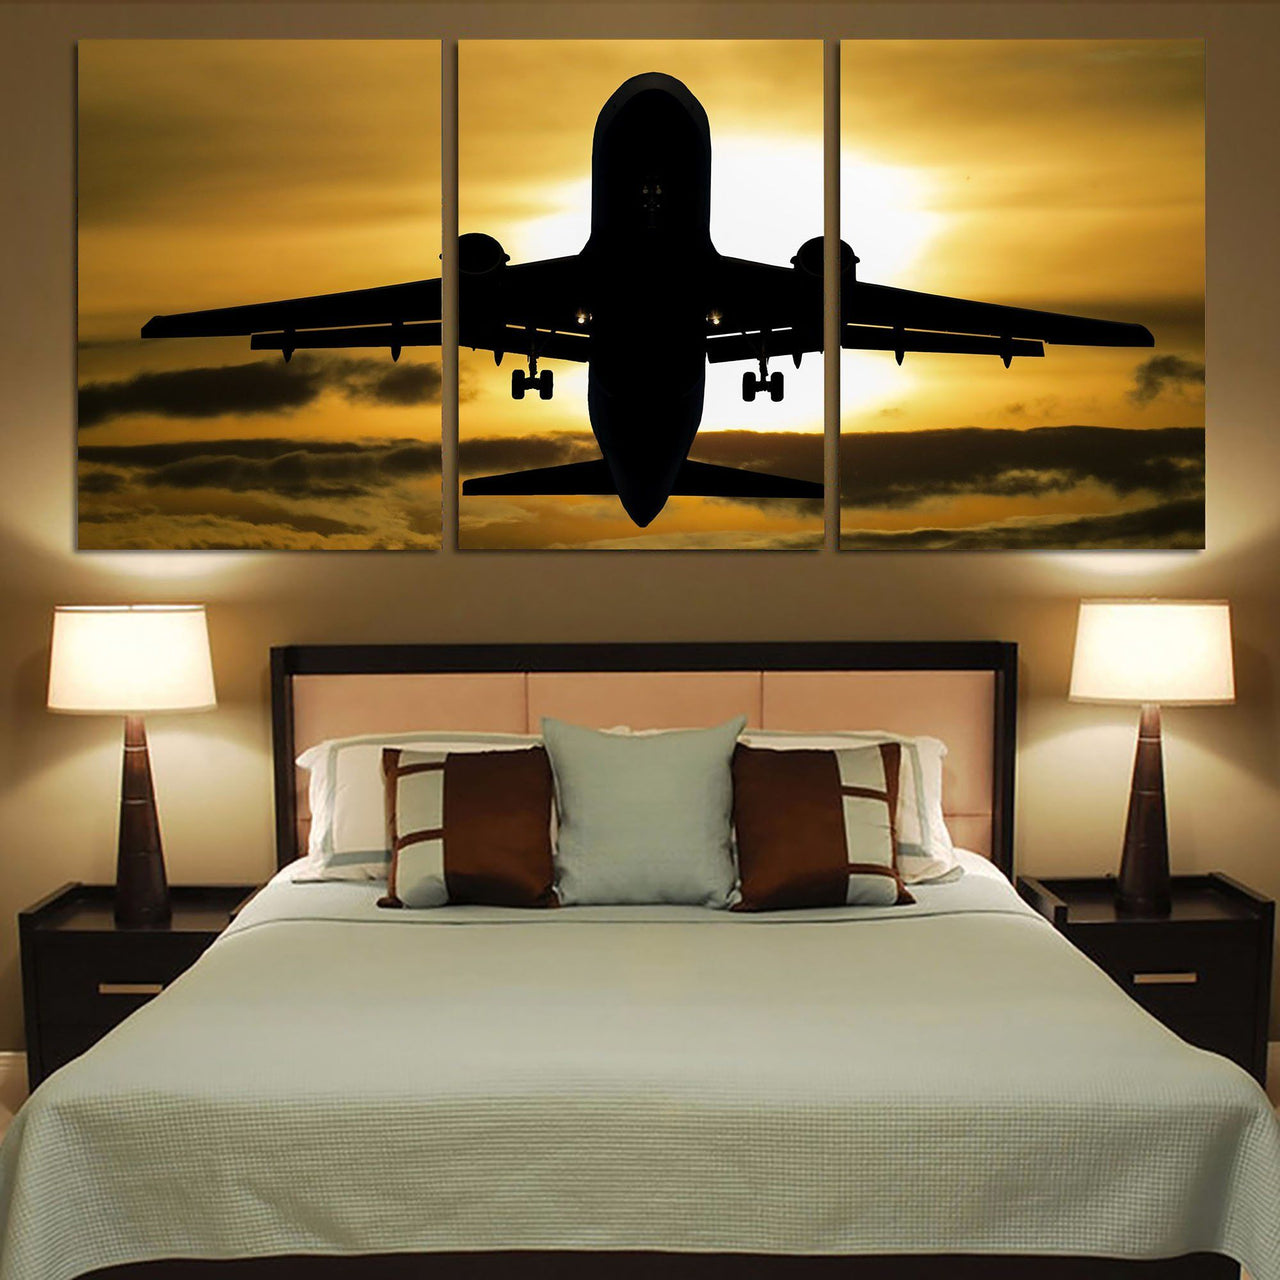 Departing Passenger Jet During Sunset Printed Canvas Posters (3 Pieces) Aviation Shop 